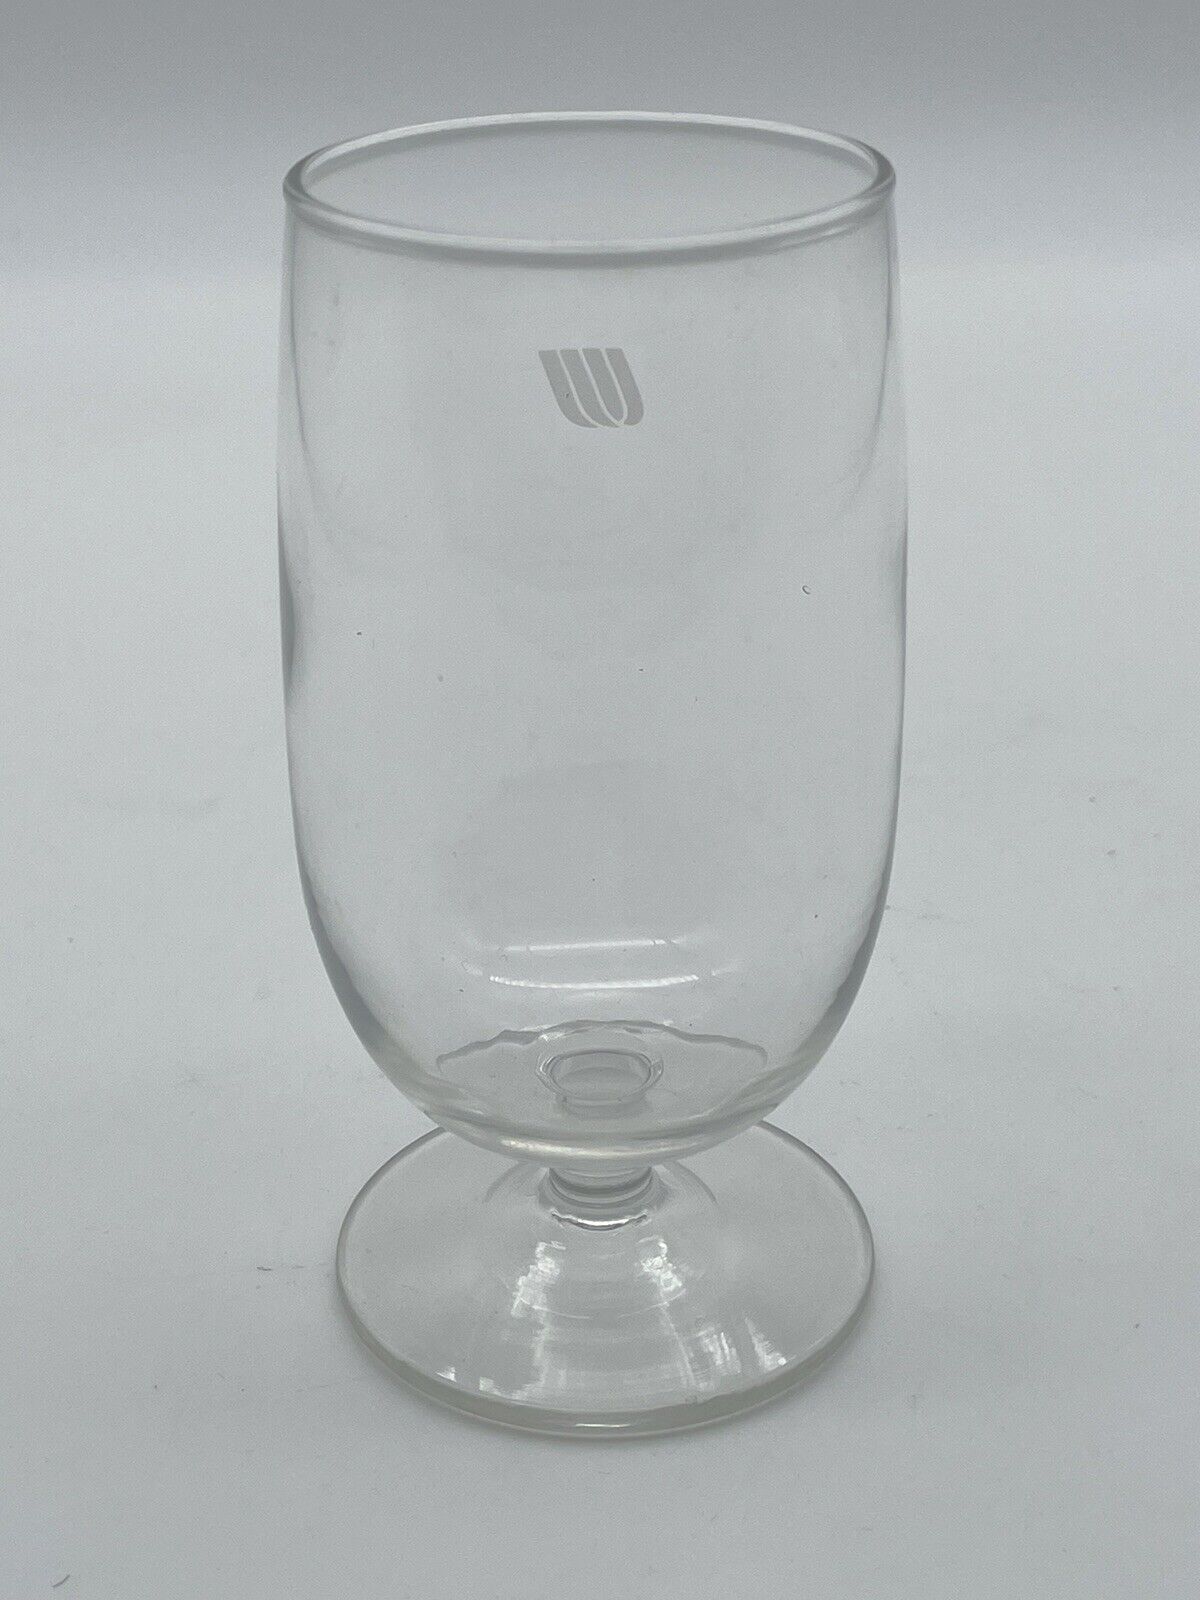 Vintage United Airlines Inflight Wine Glass 4.25” Unique Flaw Bubble In Glass